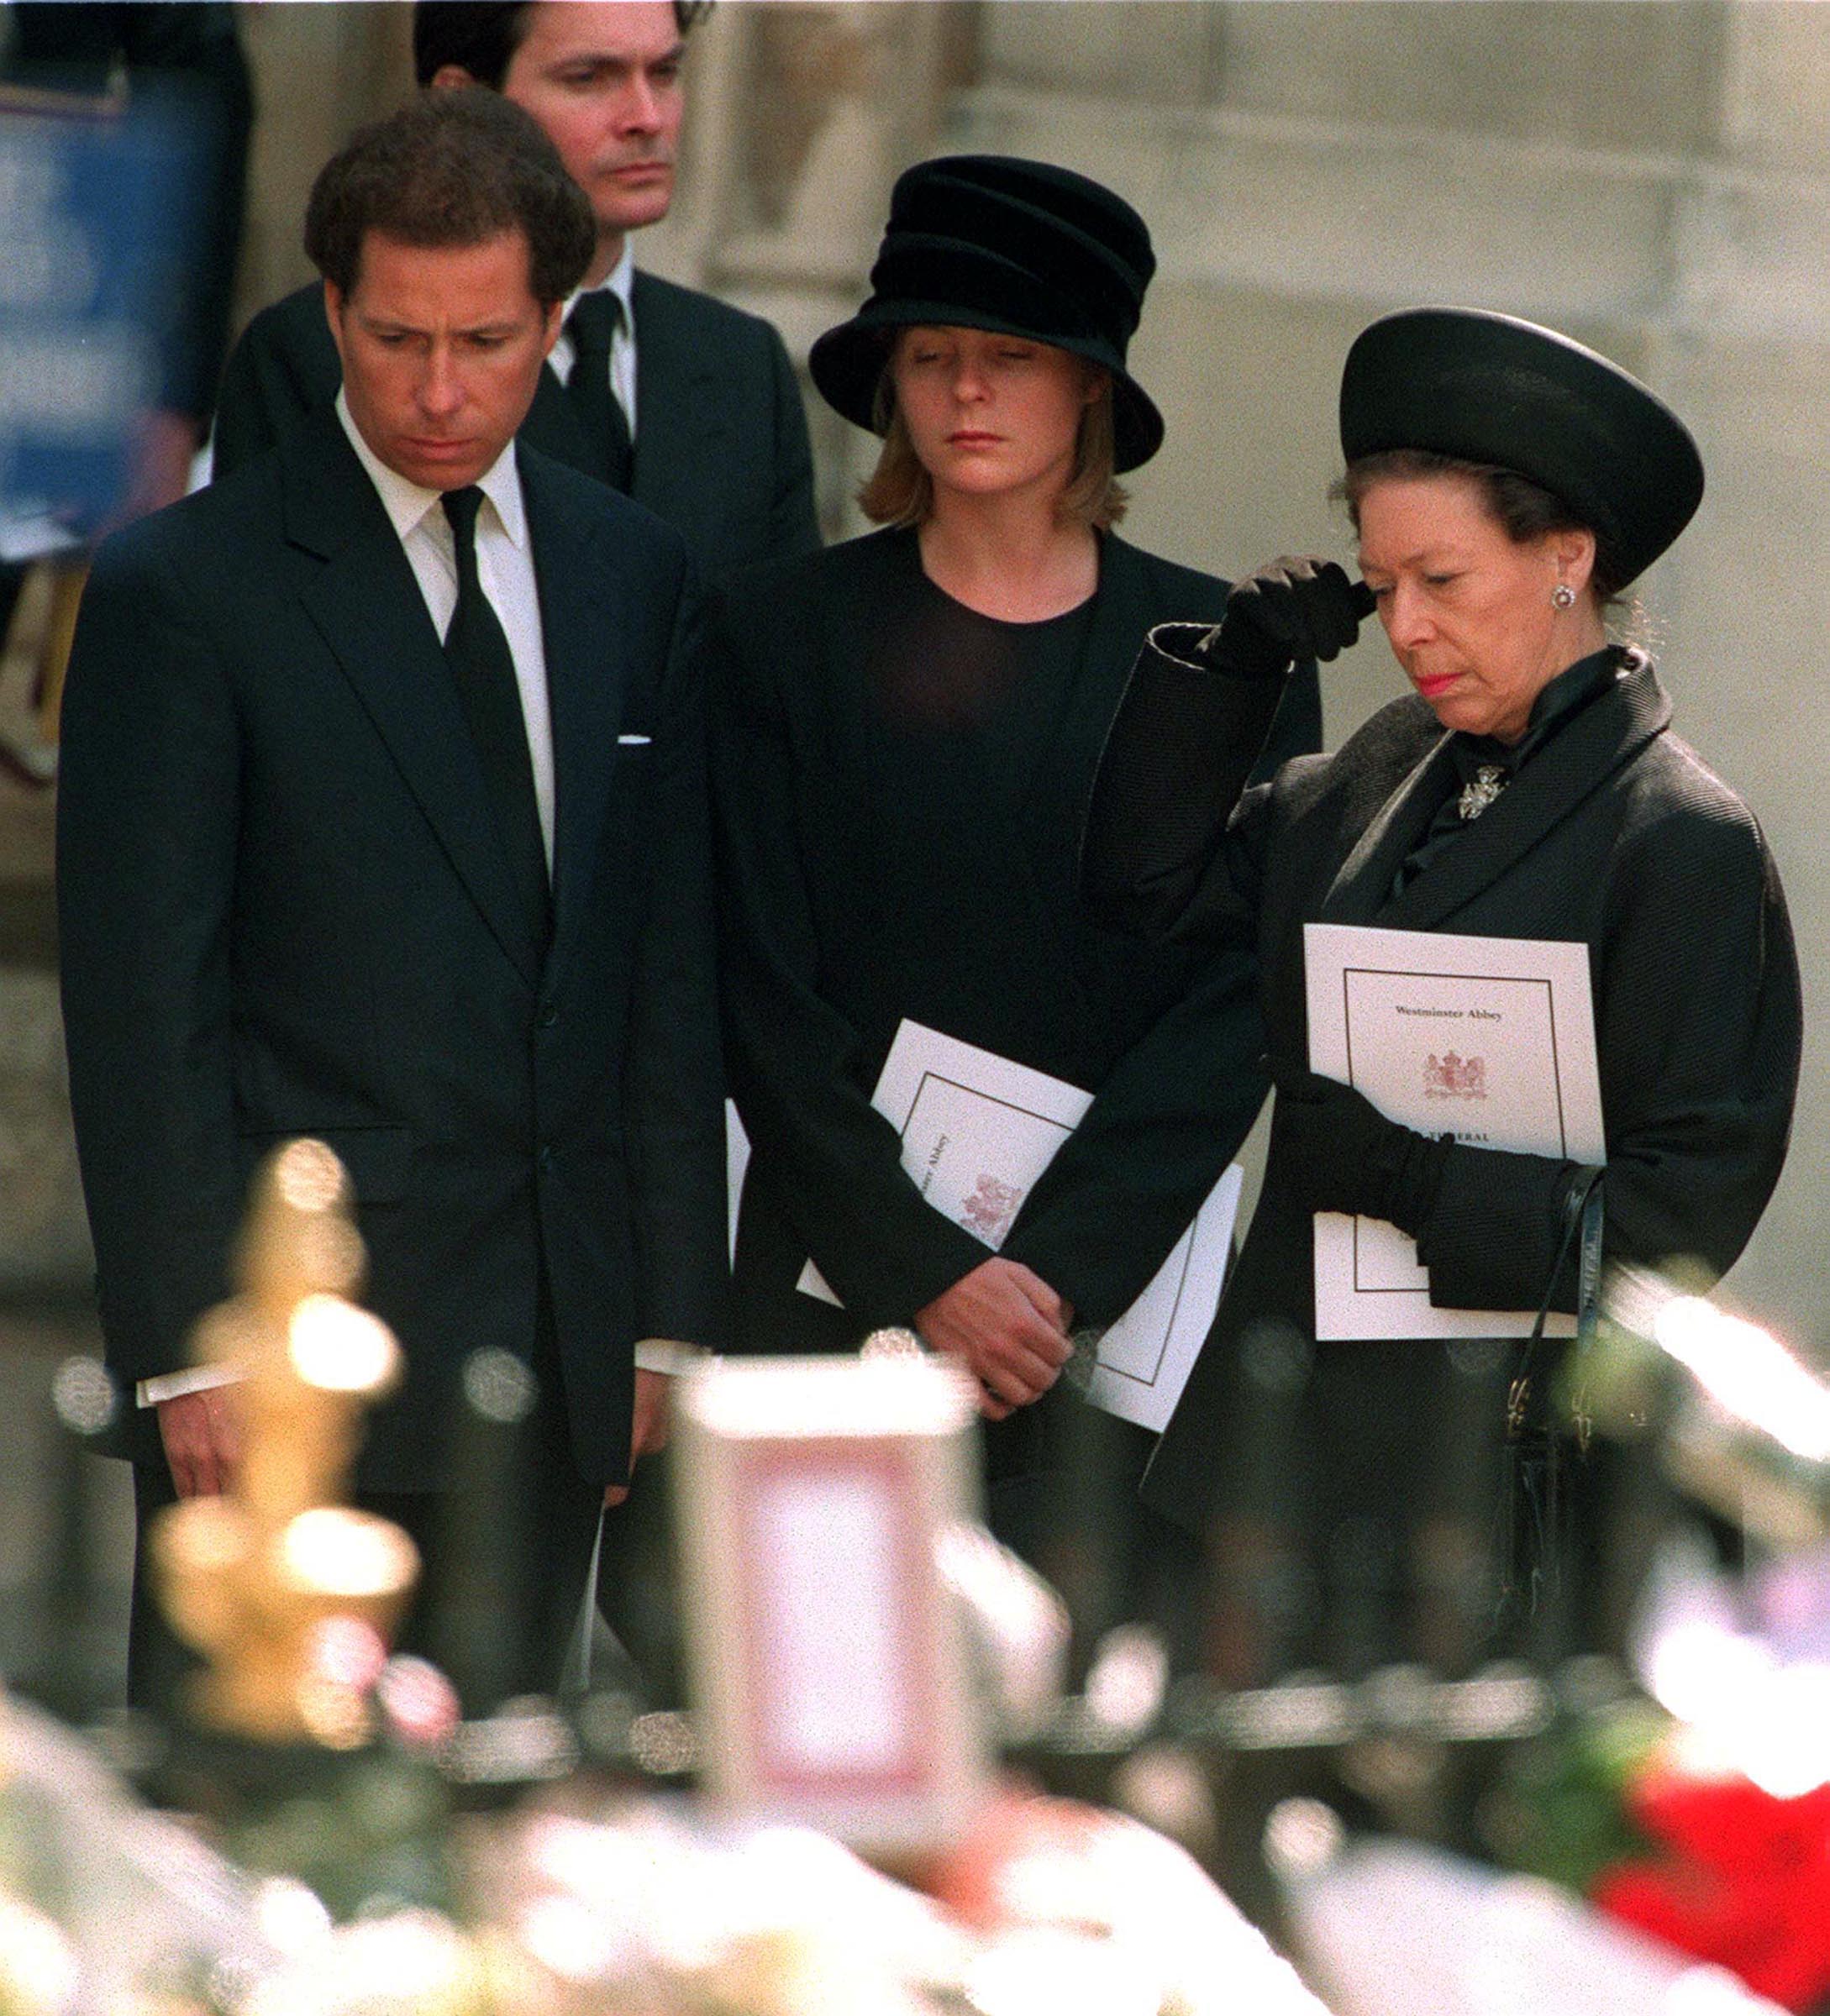 <p>Princess Margaret, son Viscount Linley (who's now the Earl of Snowdon) and his then-wife, Lady Serena Linley, paused to look at tributes left by the public as they left Westminster Abbey in London after the funeral service for Princess Diana on Sept. 6, 1997. </p>